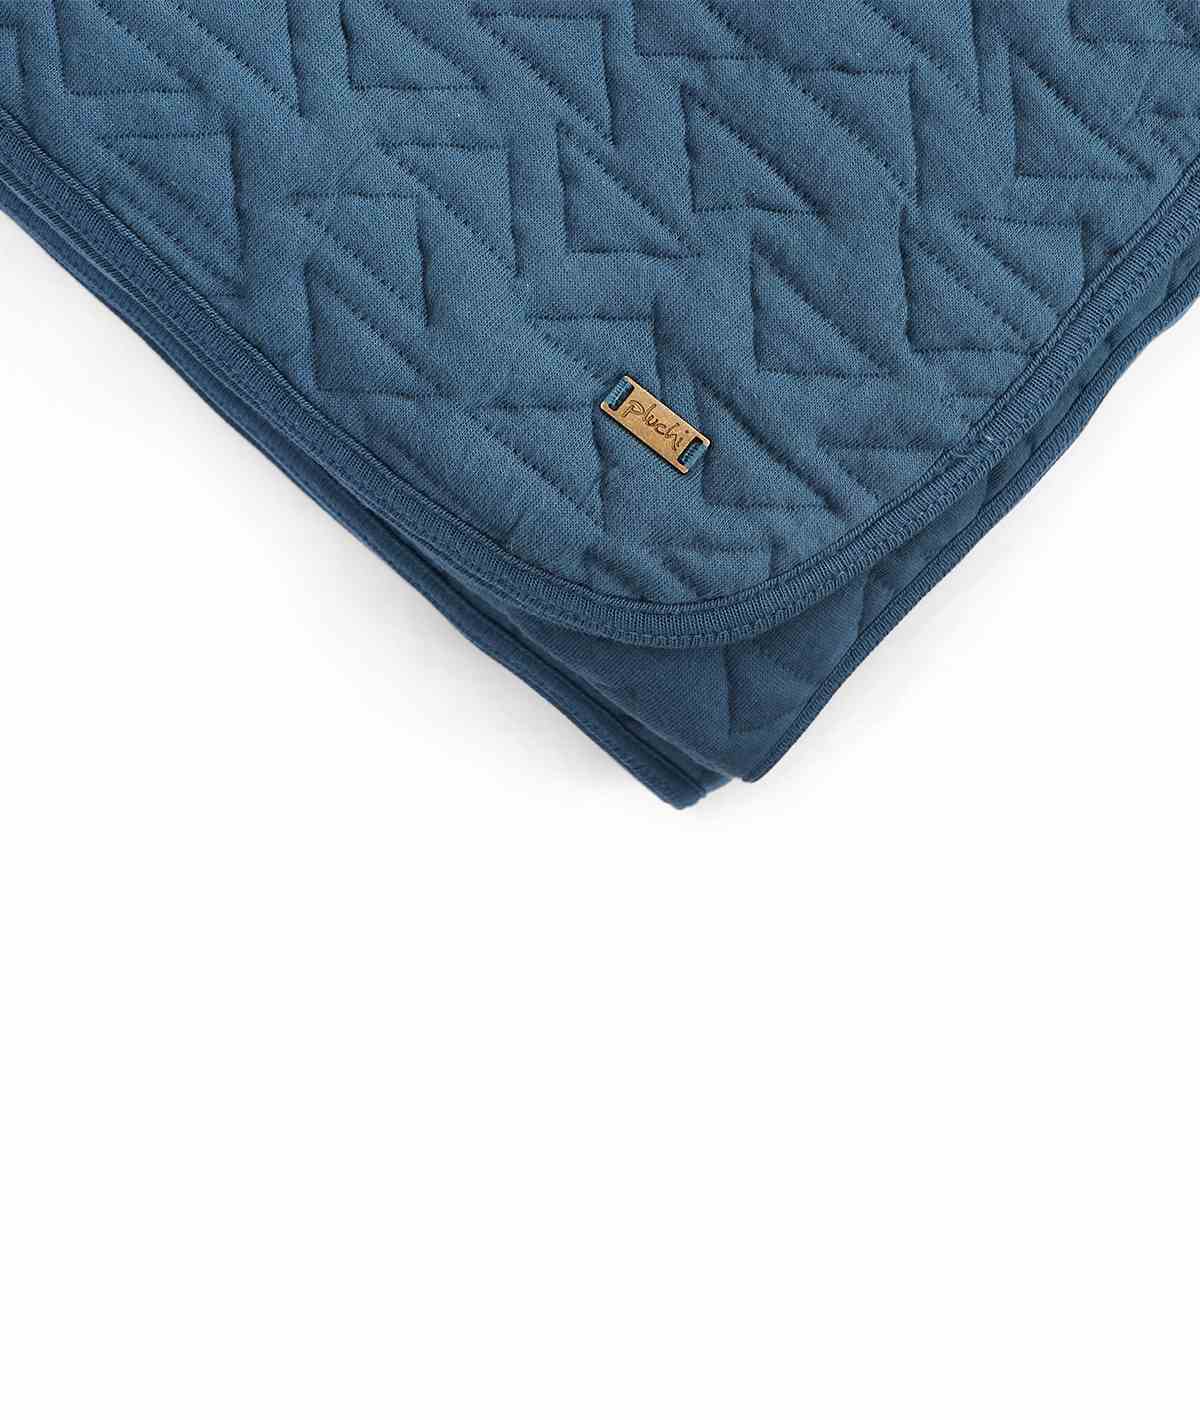 single bed quilted blanket